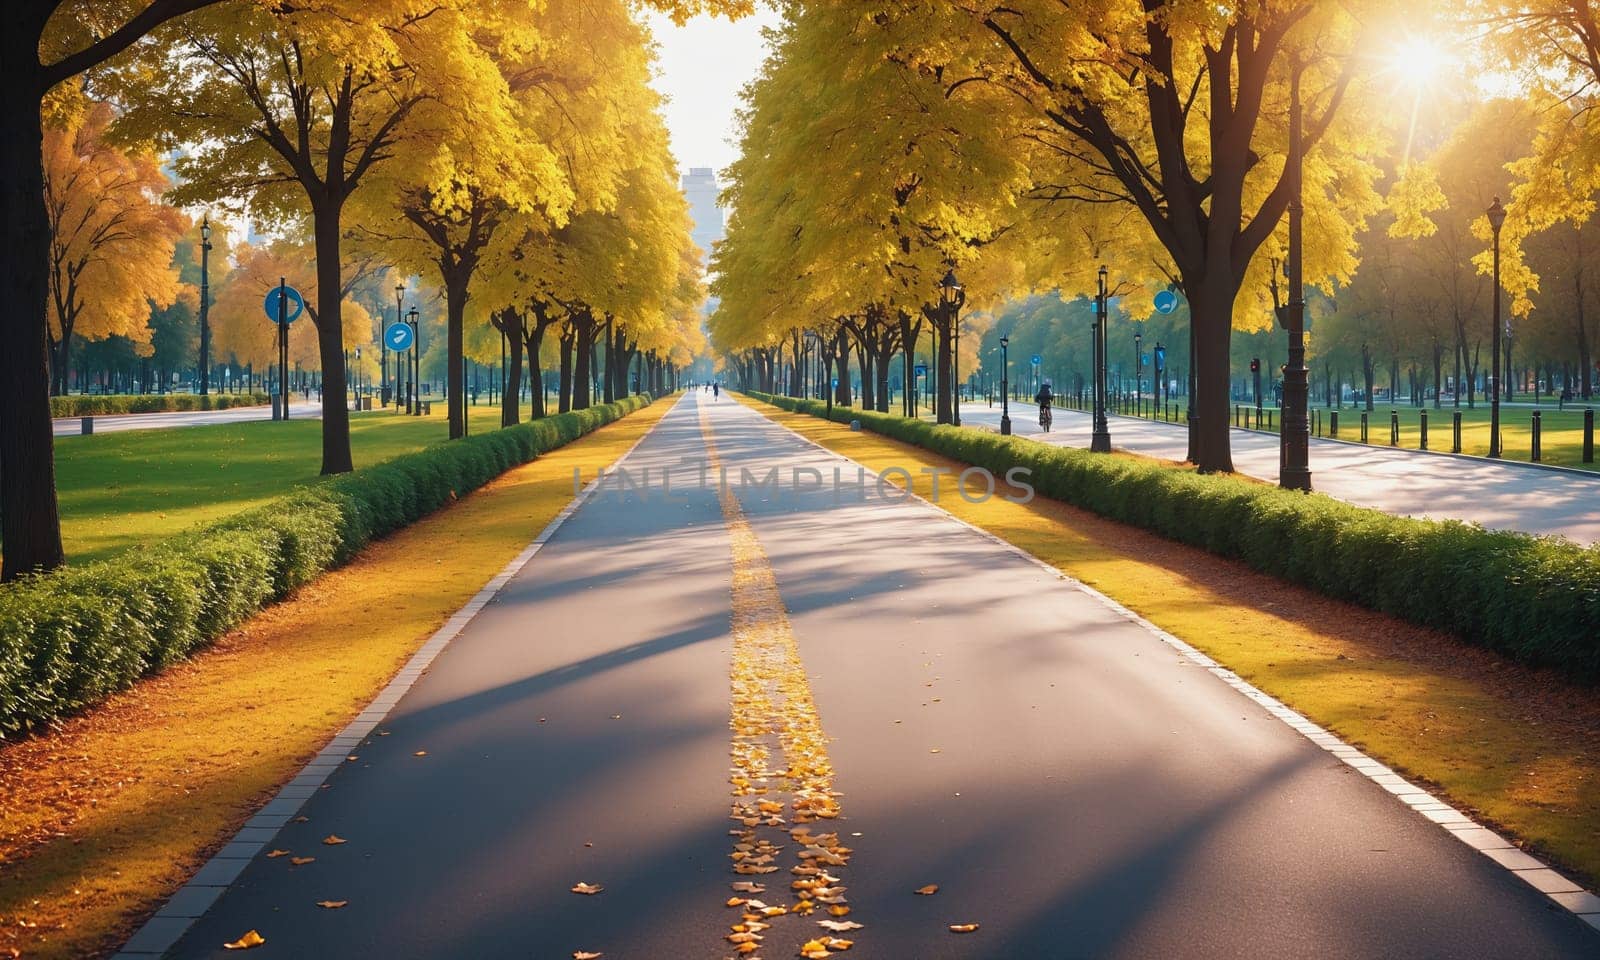 Sunlit Autumn Bicycle Path in Park by Andre1ns